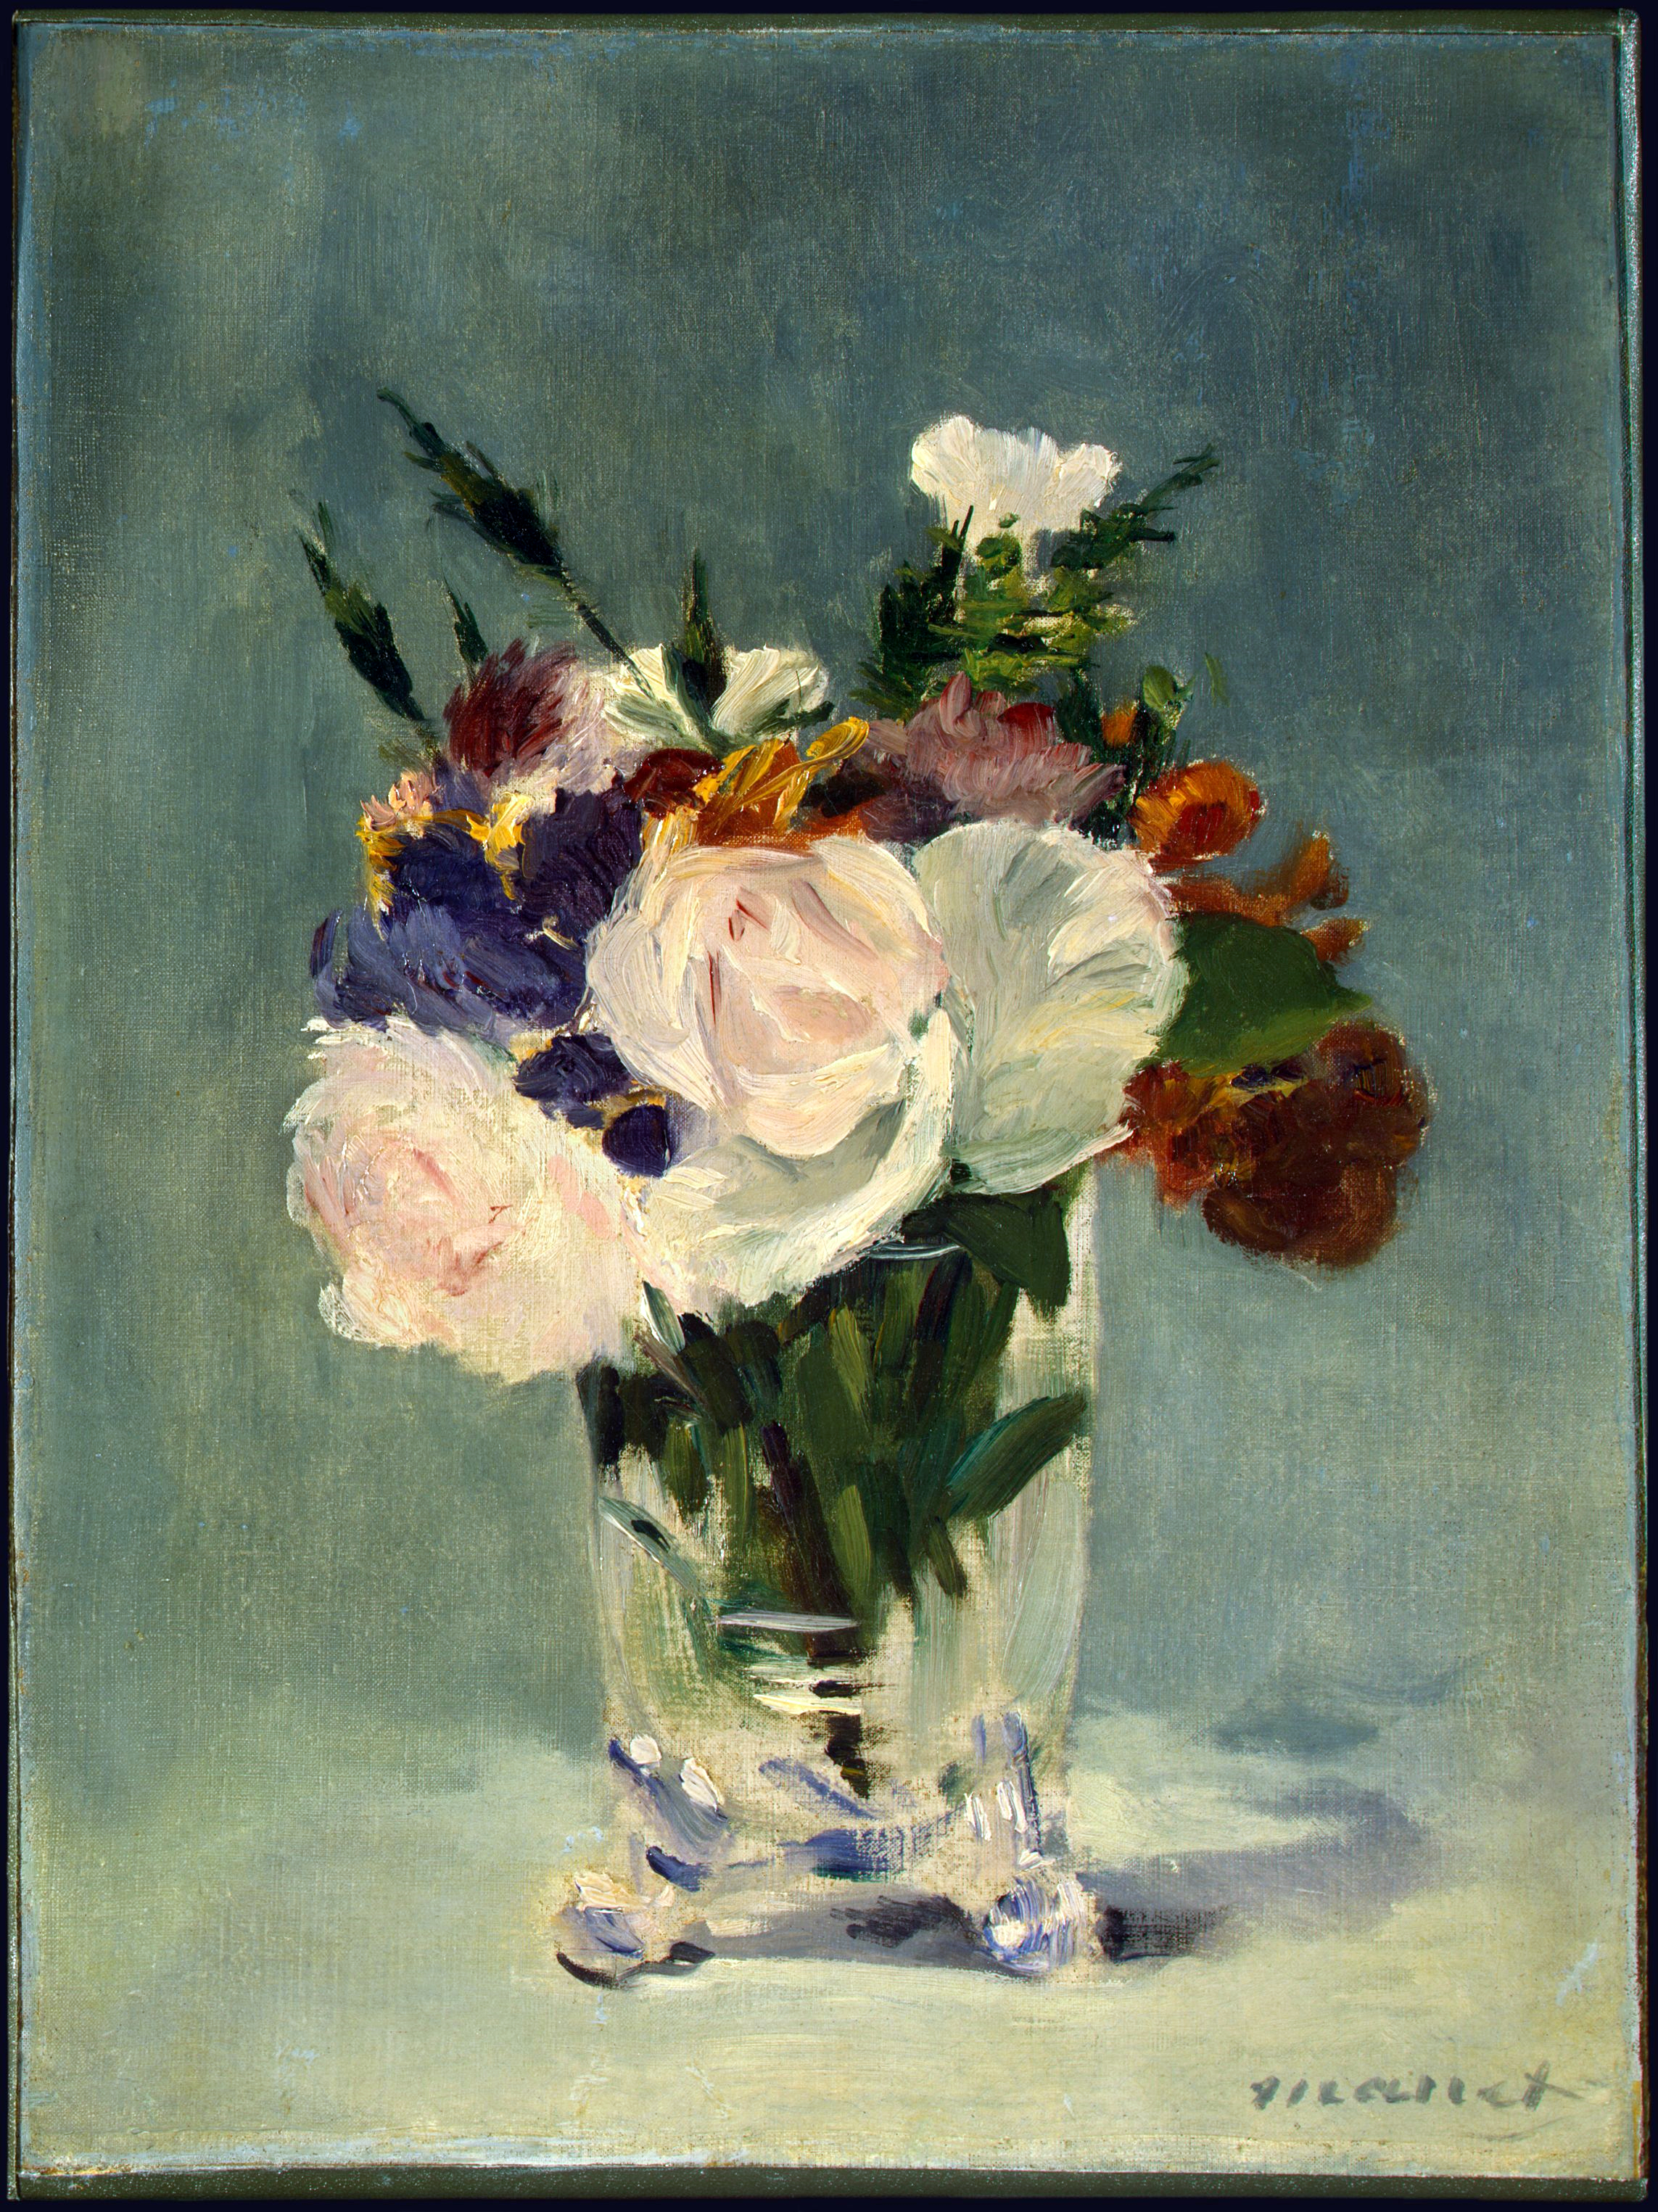 Flowers in a Crystal Vase by Édouard Manet - c. 1882 - 32.7 × 24.5 cm National Gallery of Art